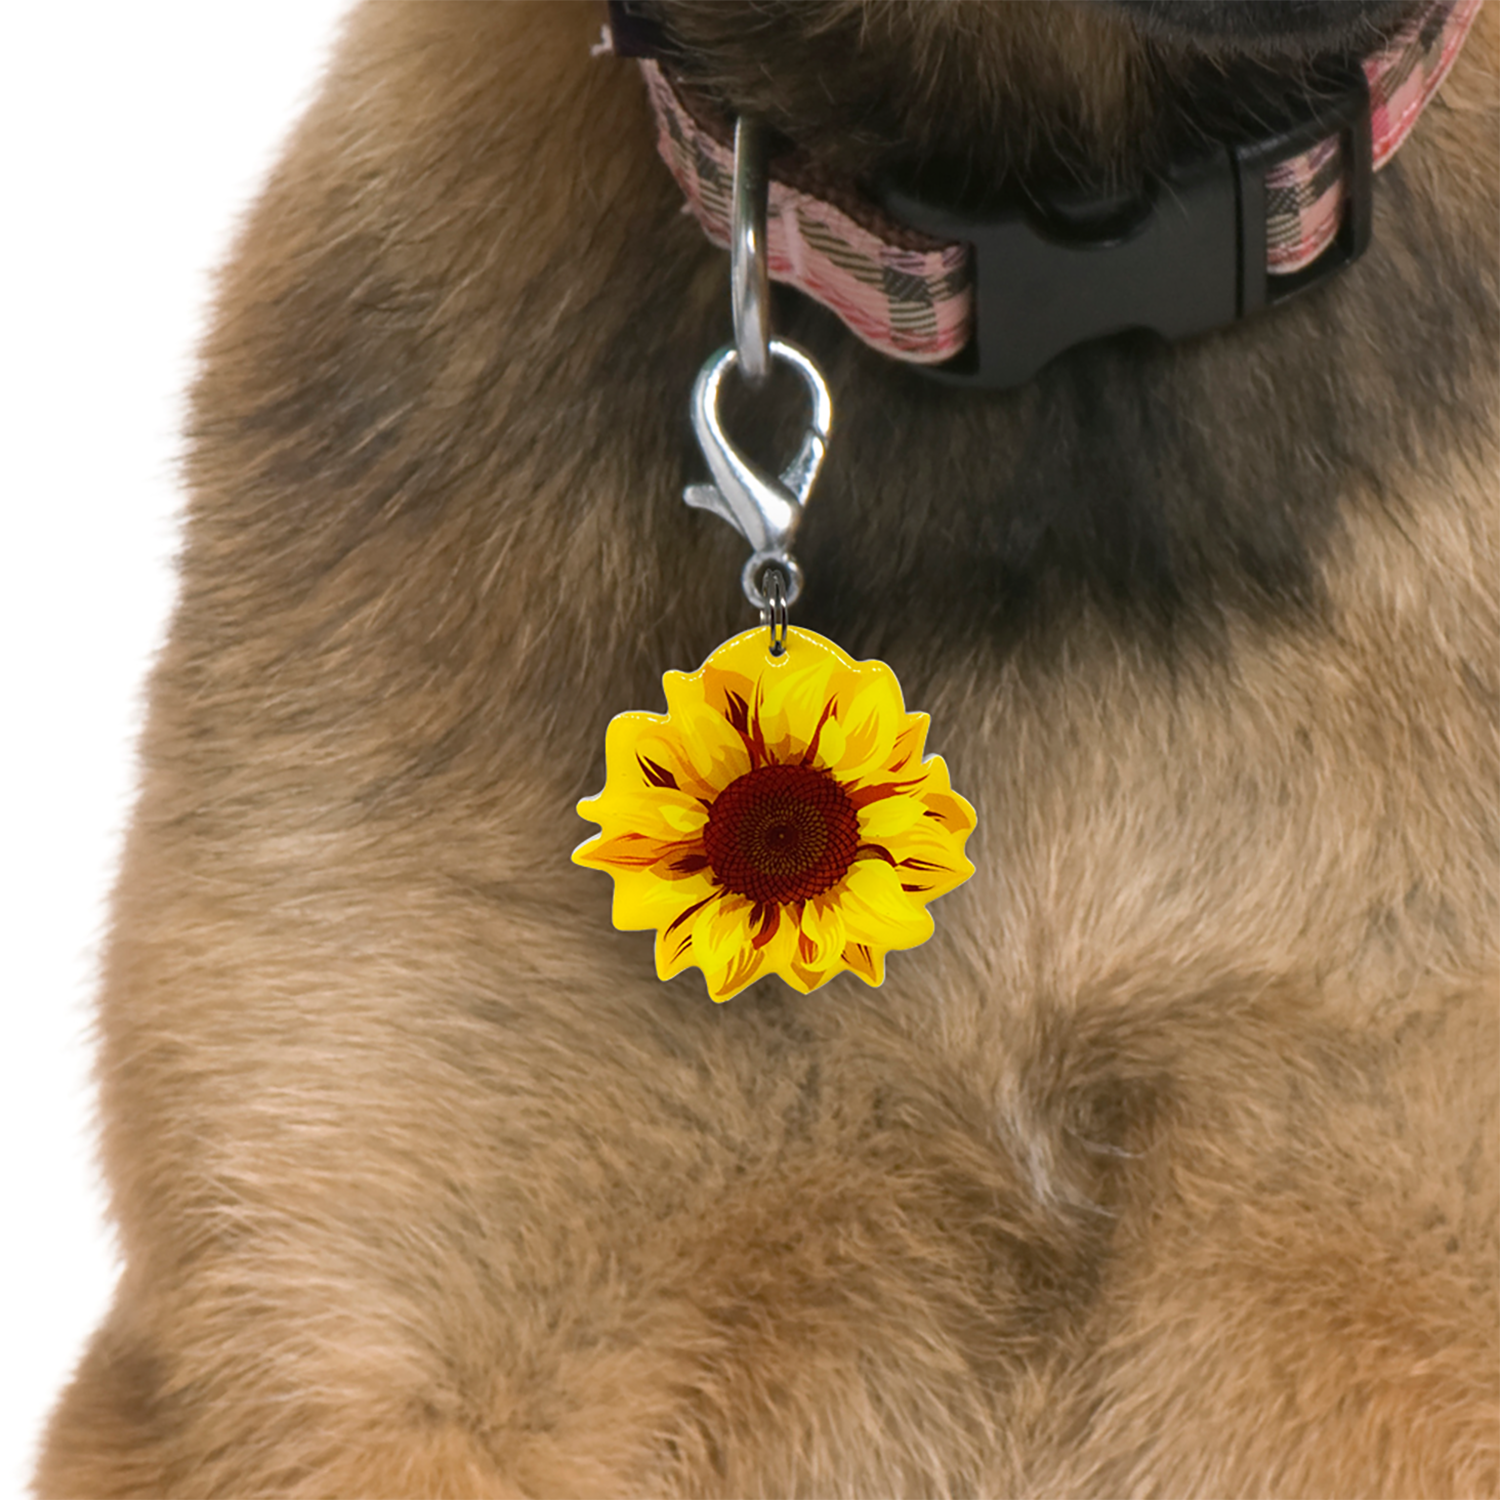 Sunflower - 2x Tags Dog Name Tags by Bashtags